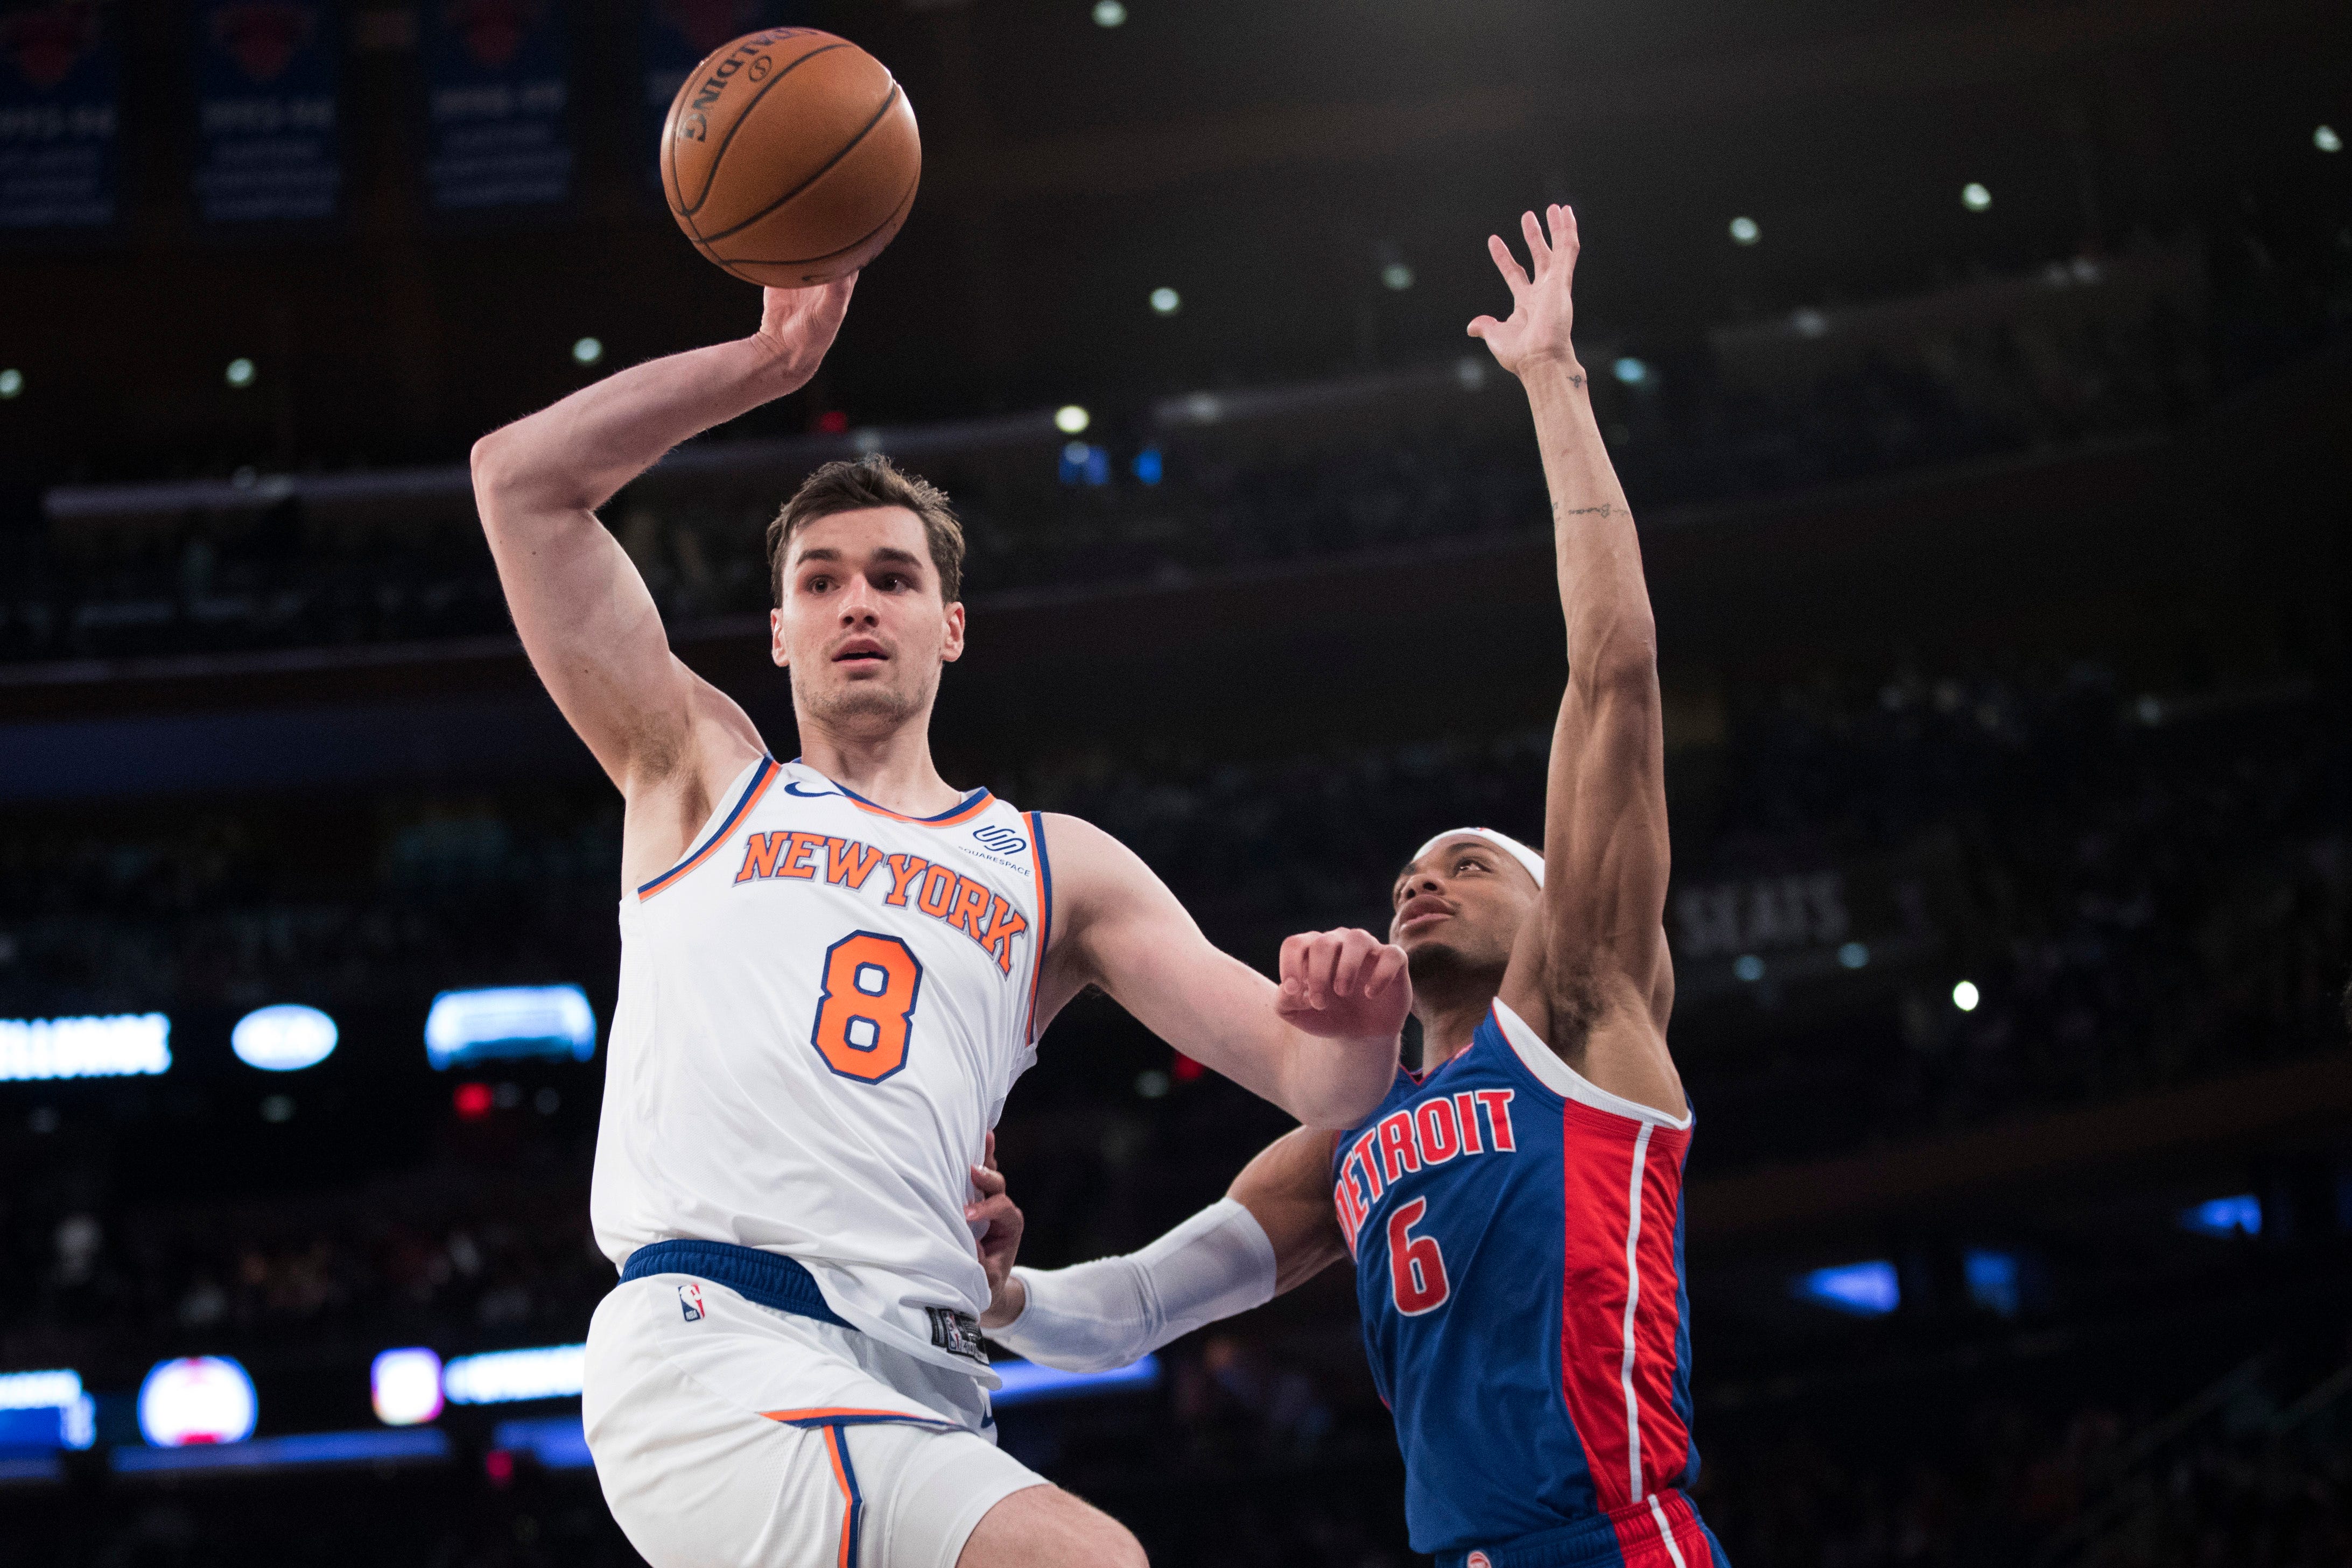 New York Knicks forward Mario Hezonja (8) goes to the basket against Detroit Pistons guard Bruce Brown (6) during the second half.